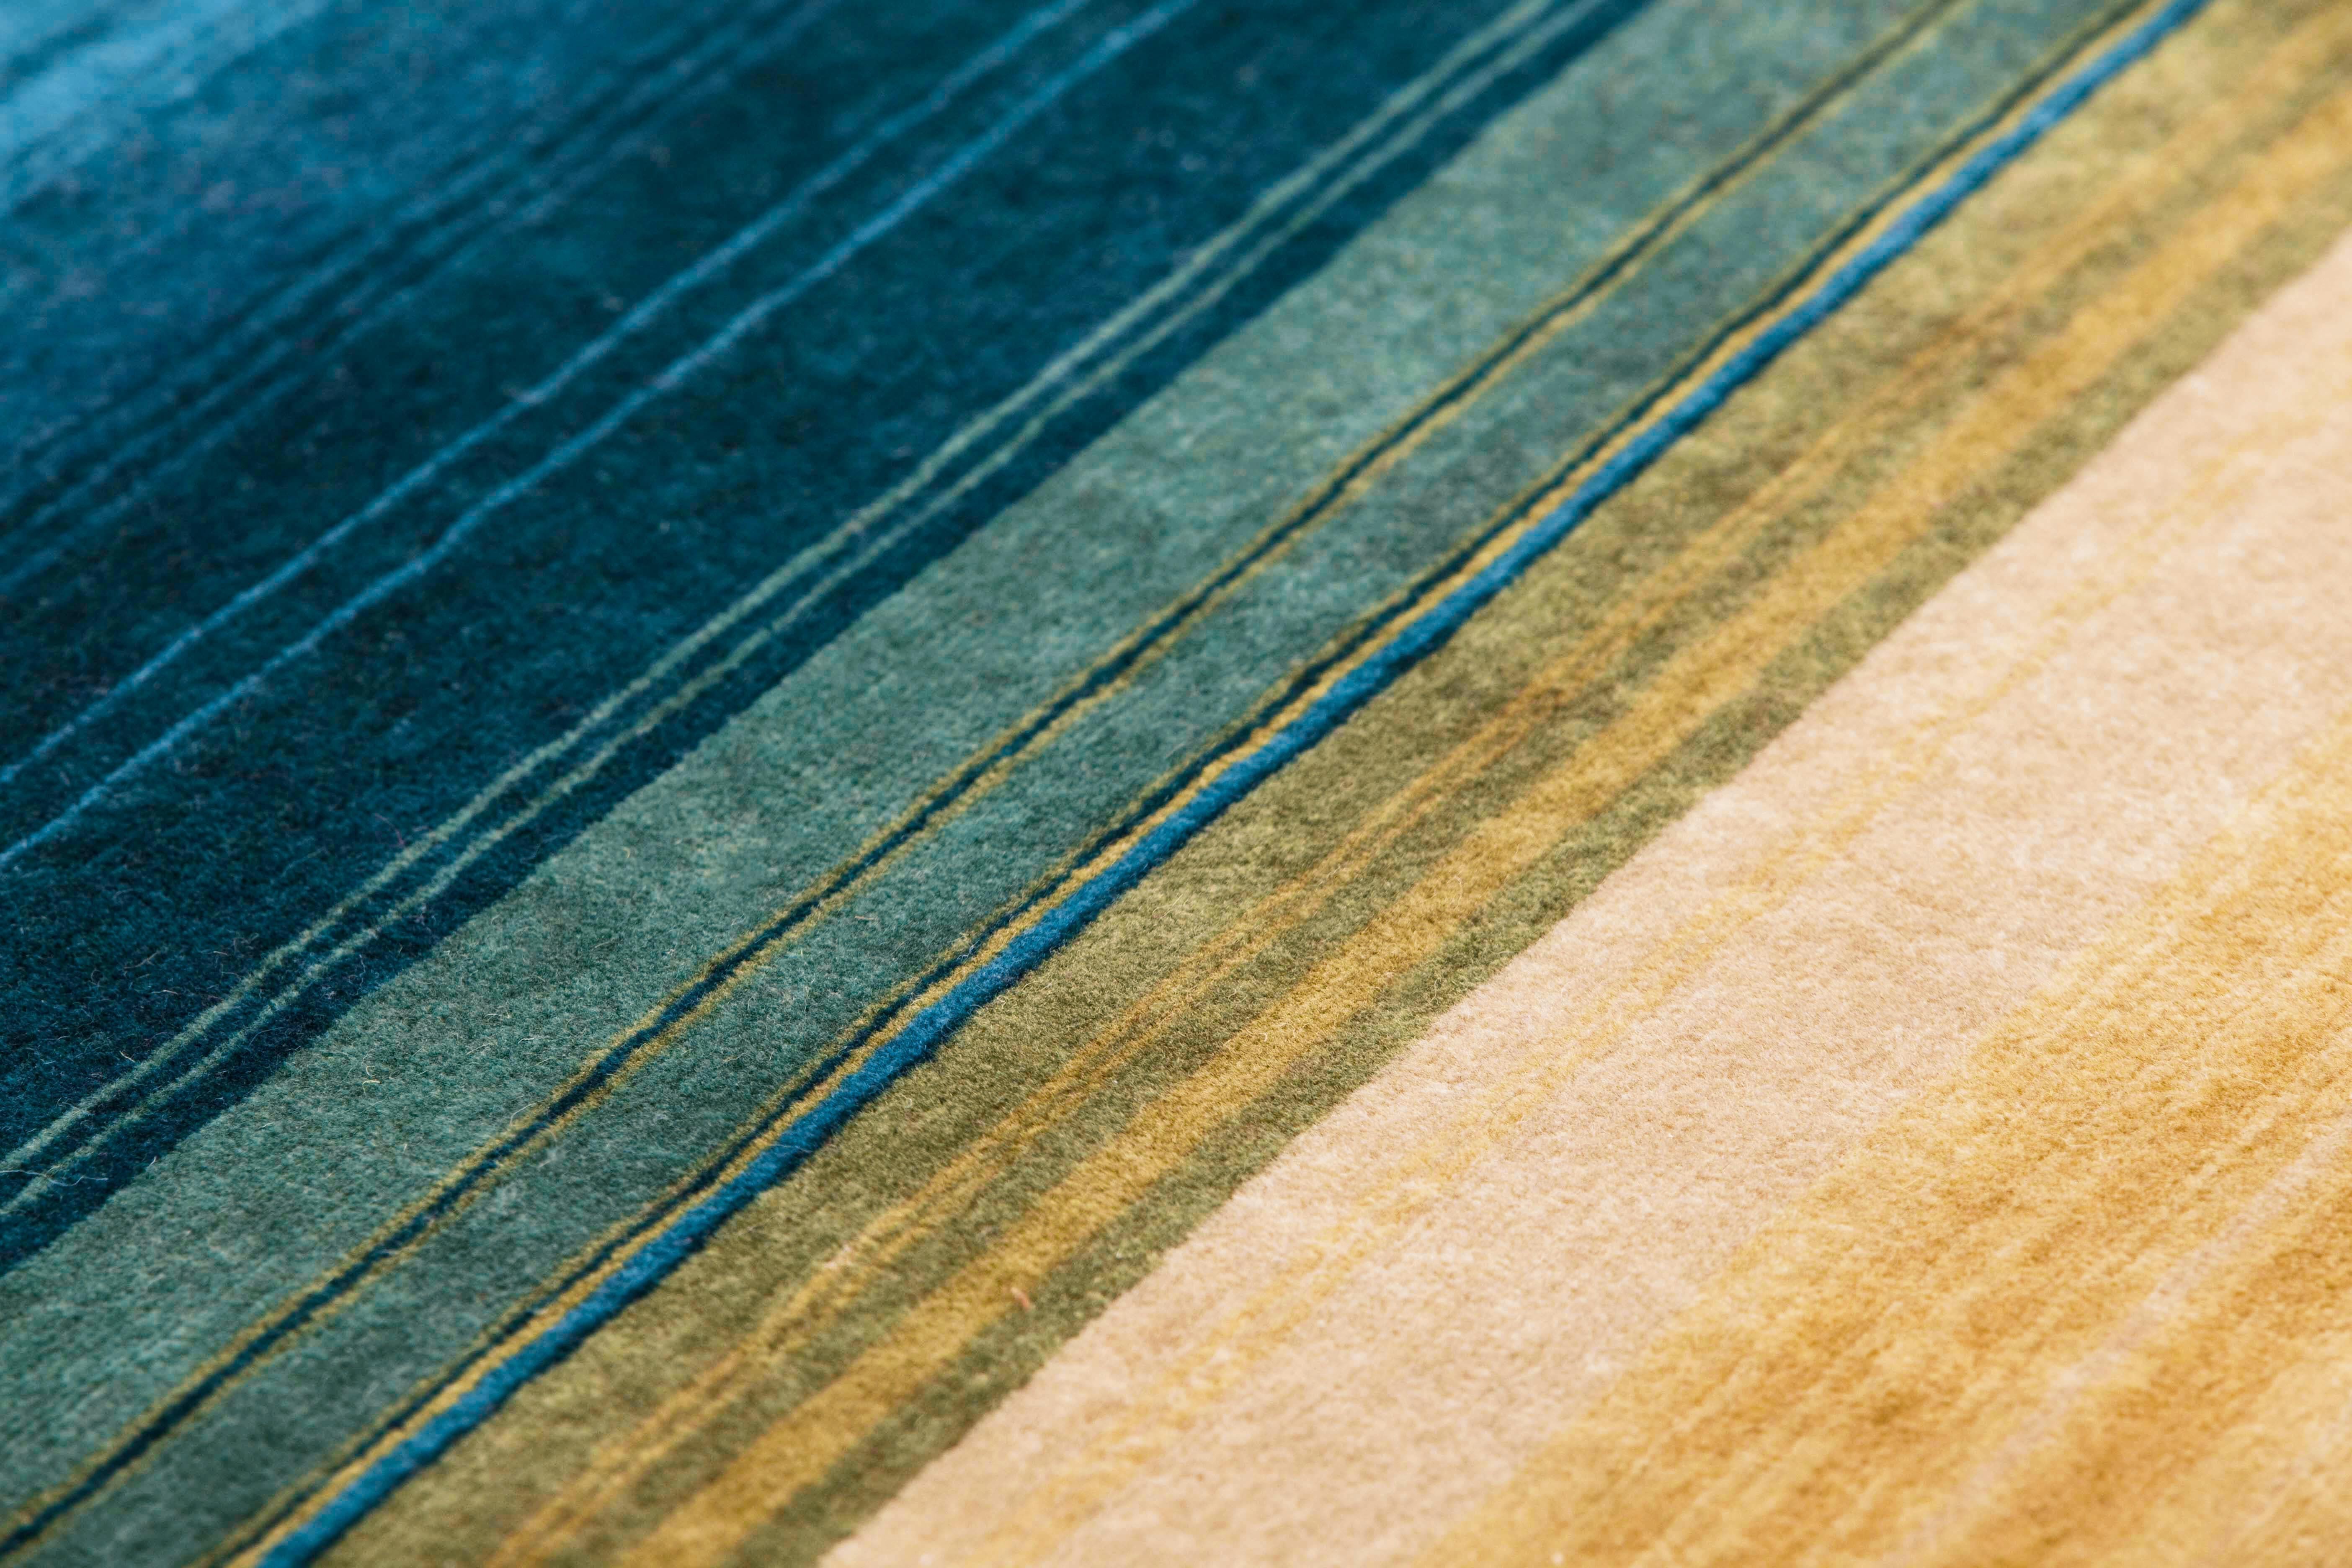 Knot by knot, all of them made by hand. In other words: hand-knotted. The most classic, perfect rug manufacturing technique. Tiedye threads, knotted by hand, tribal and authentic... Sometimes the best thing to do with a technique is to leave it as